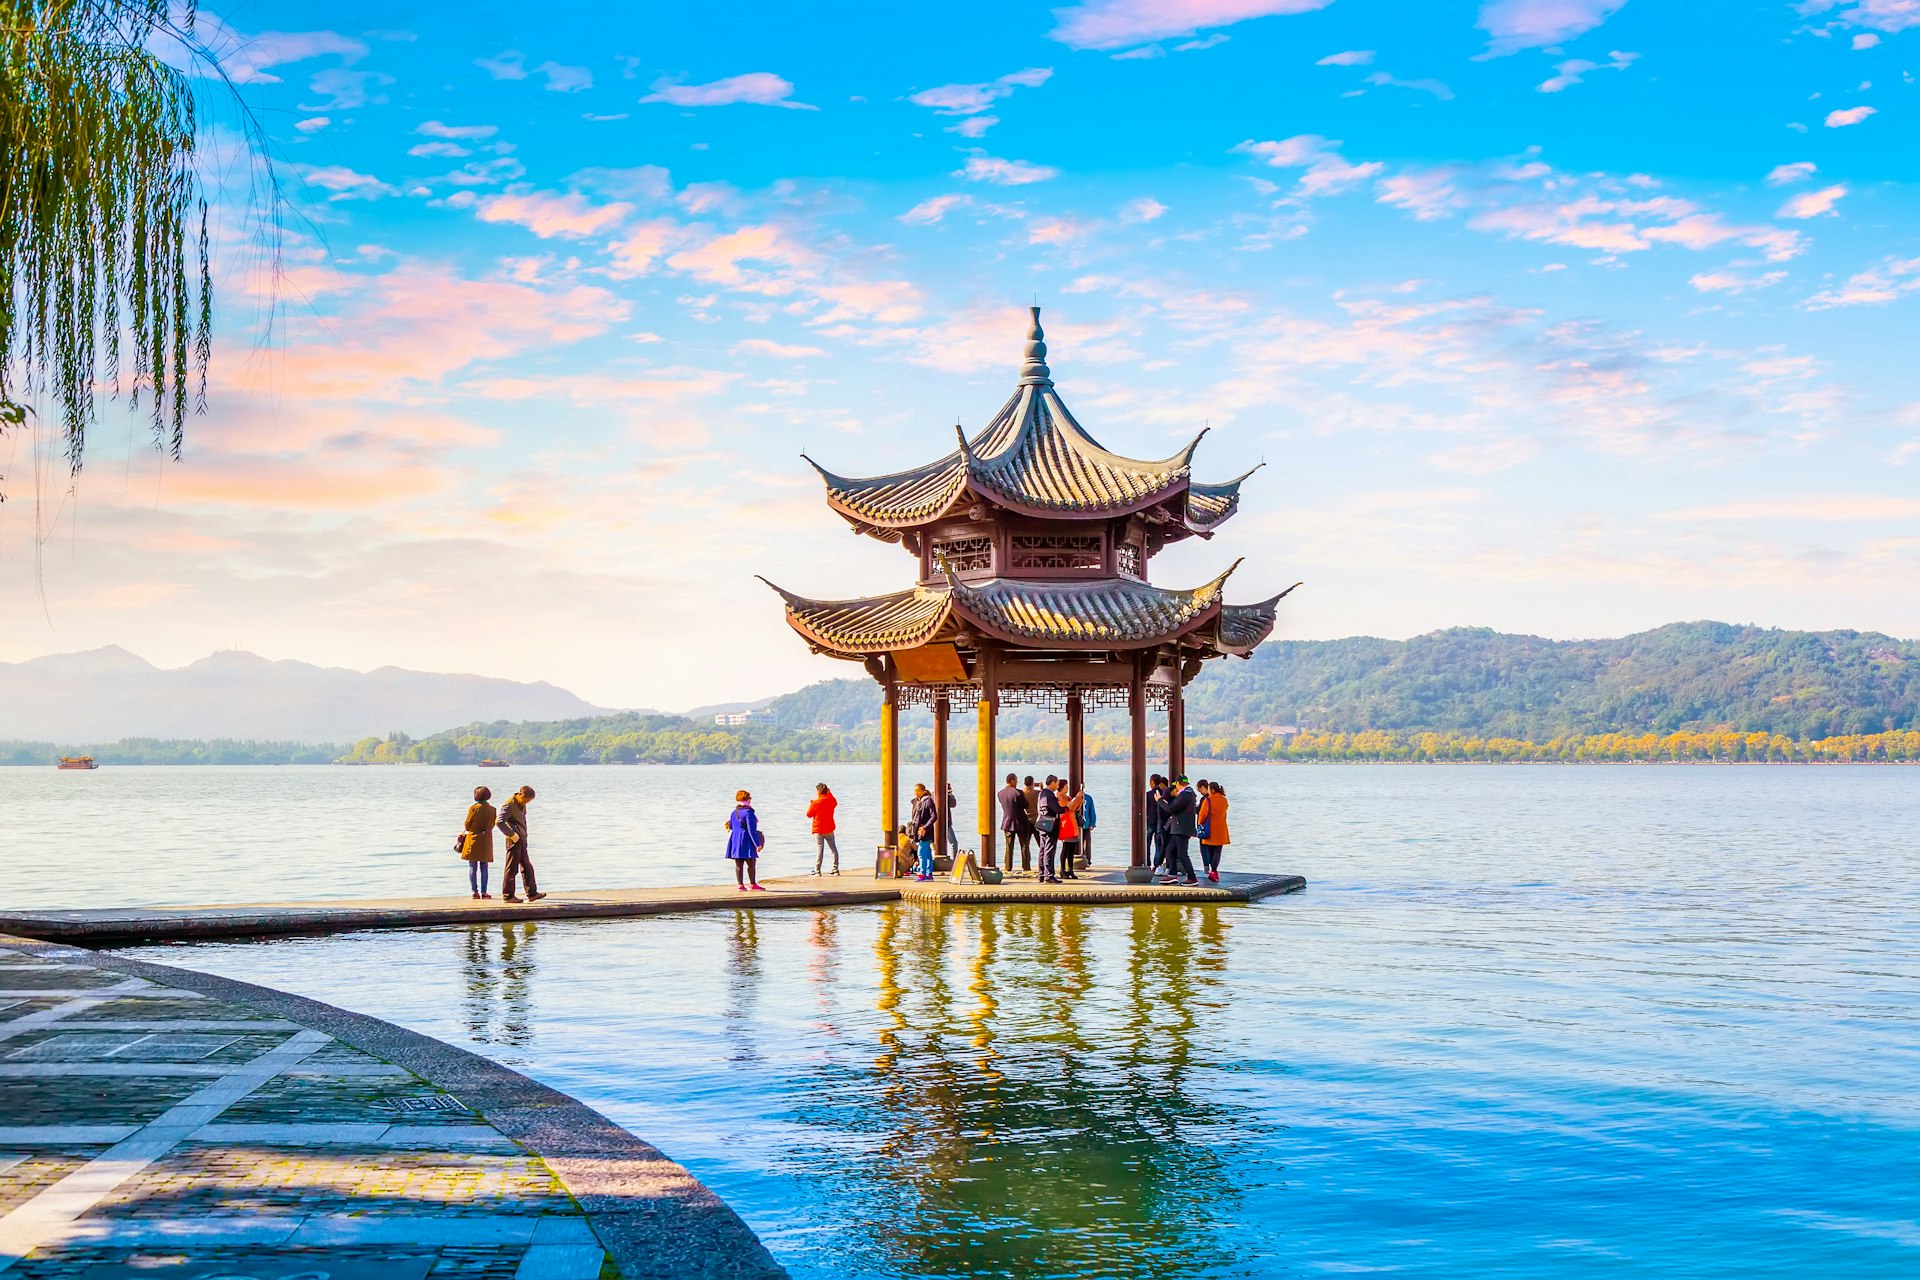 A pagoda stands on a clear lake. There are people underneath it and the sky is a clear blue.